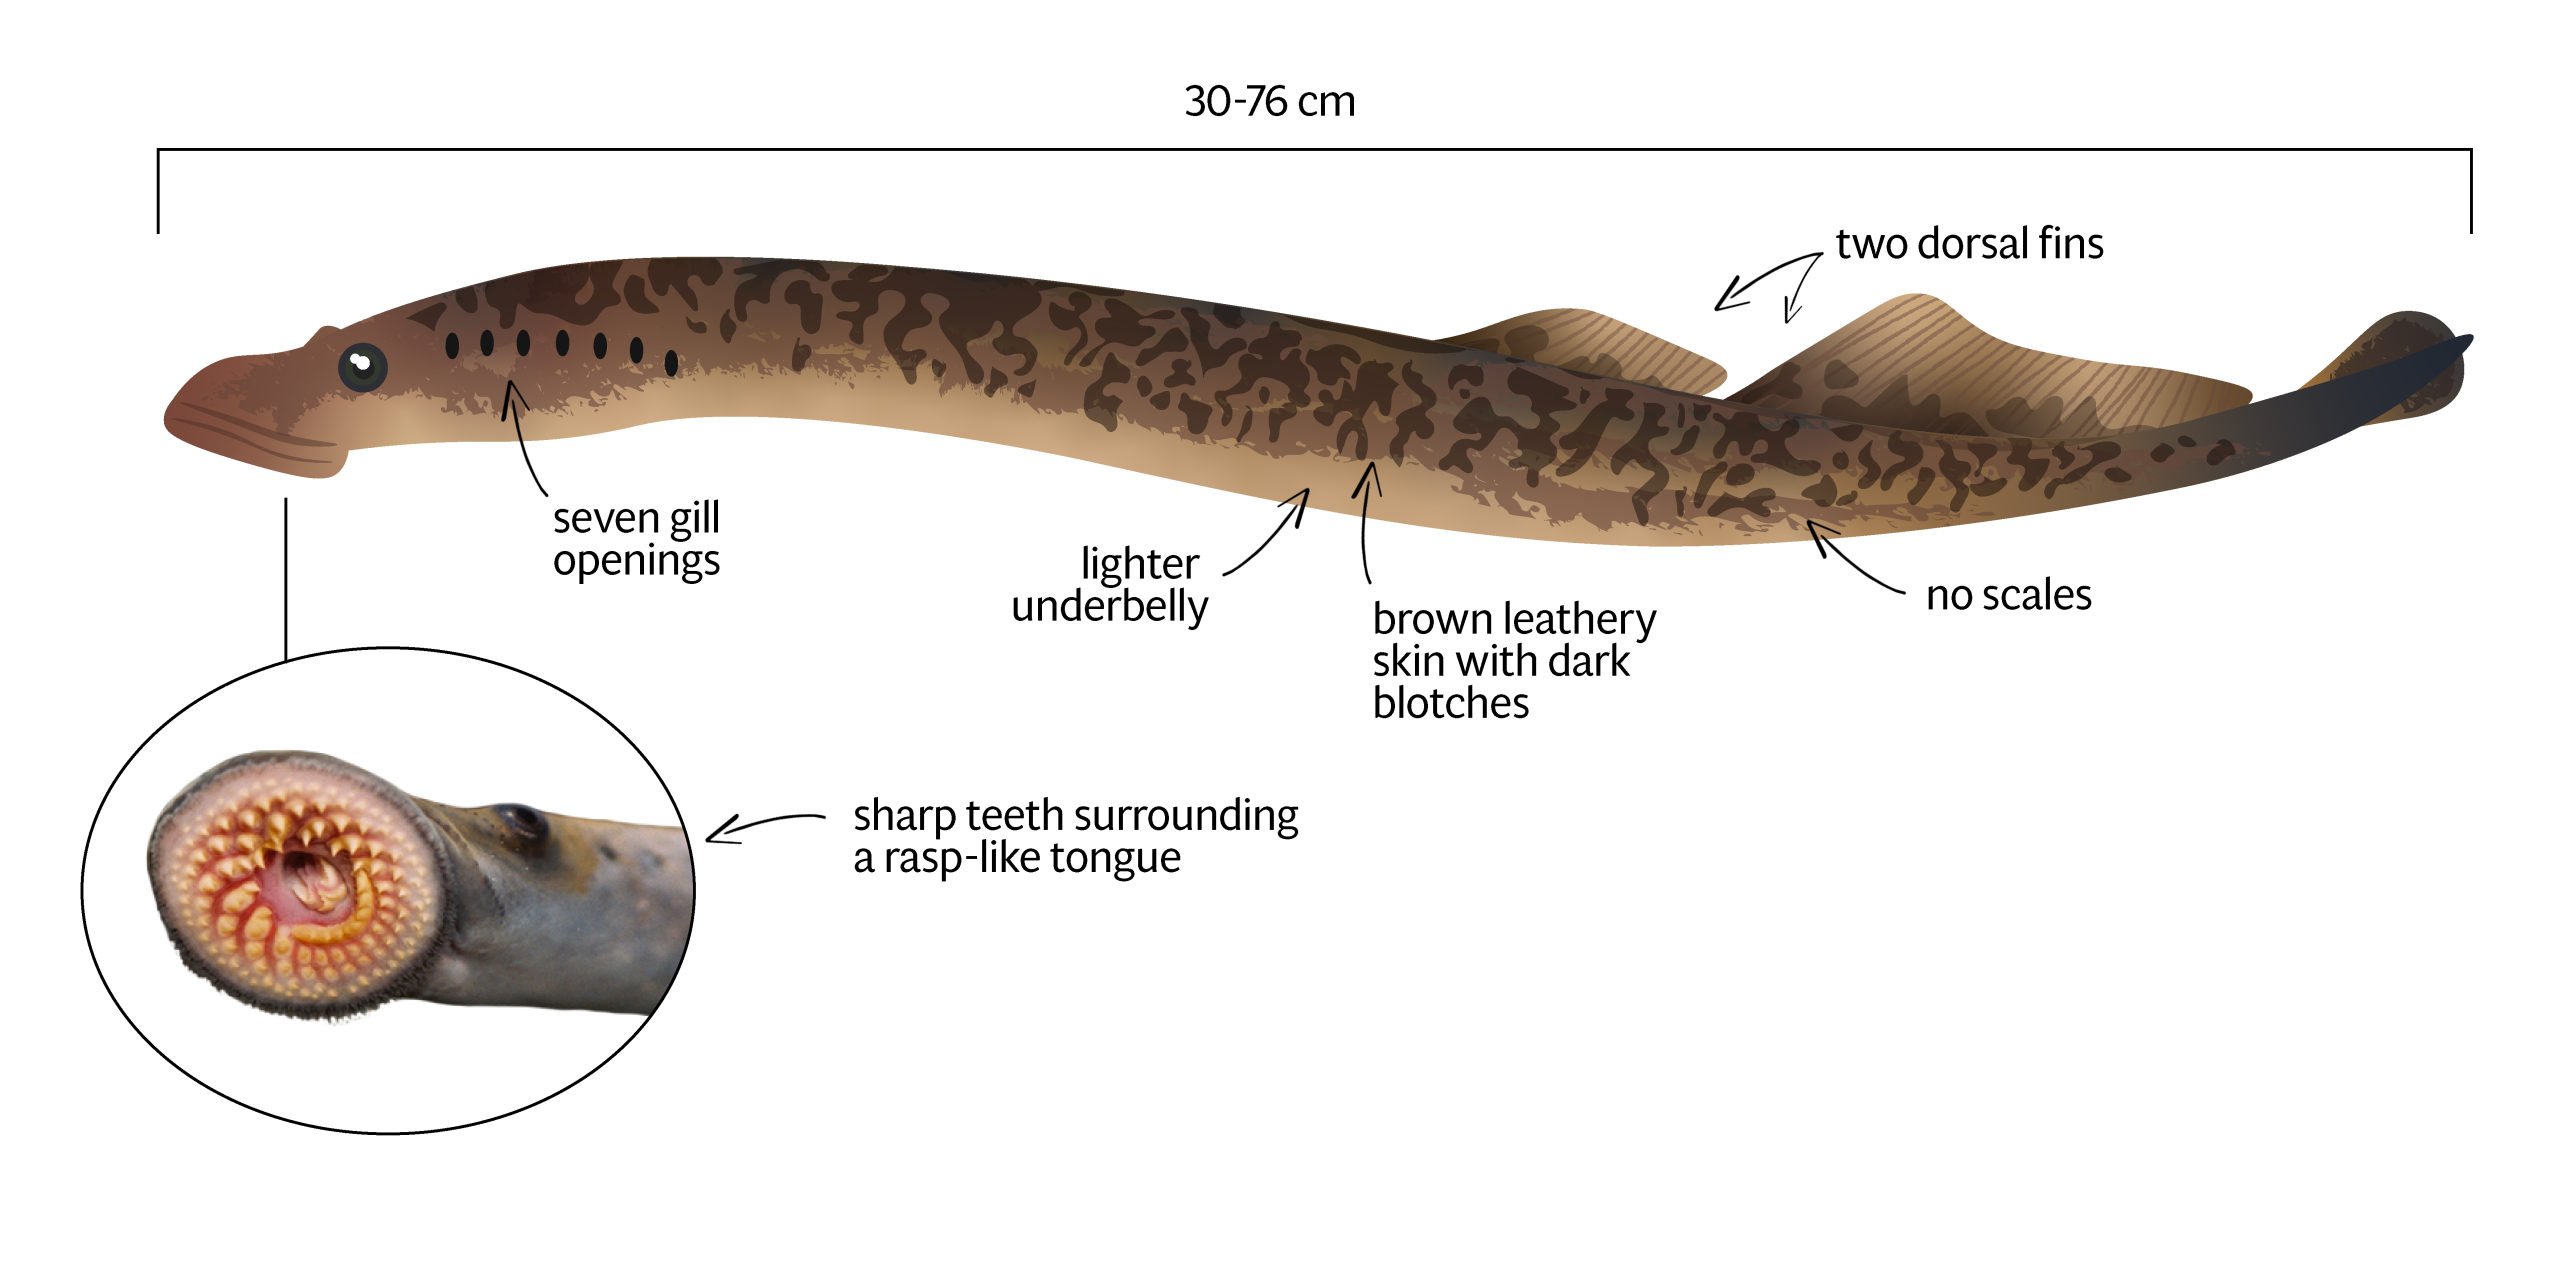 Sea Lamprey Profile And Resources, What Are Lampreys Good For